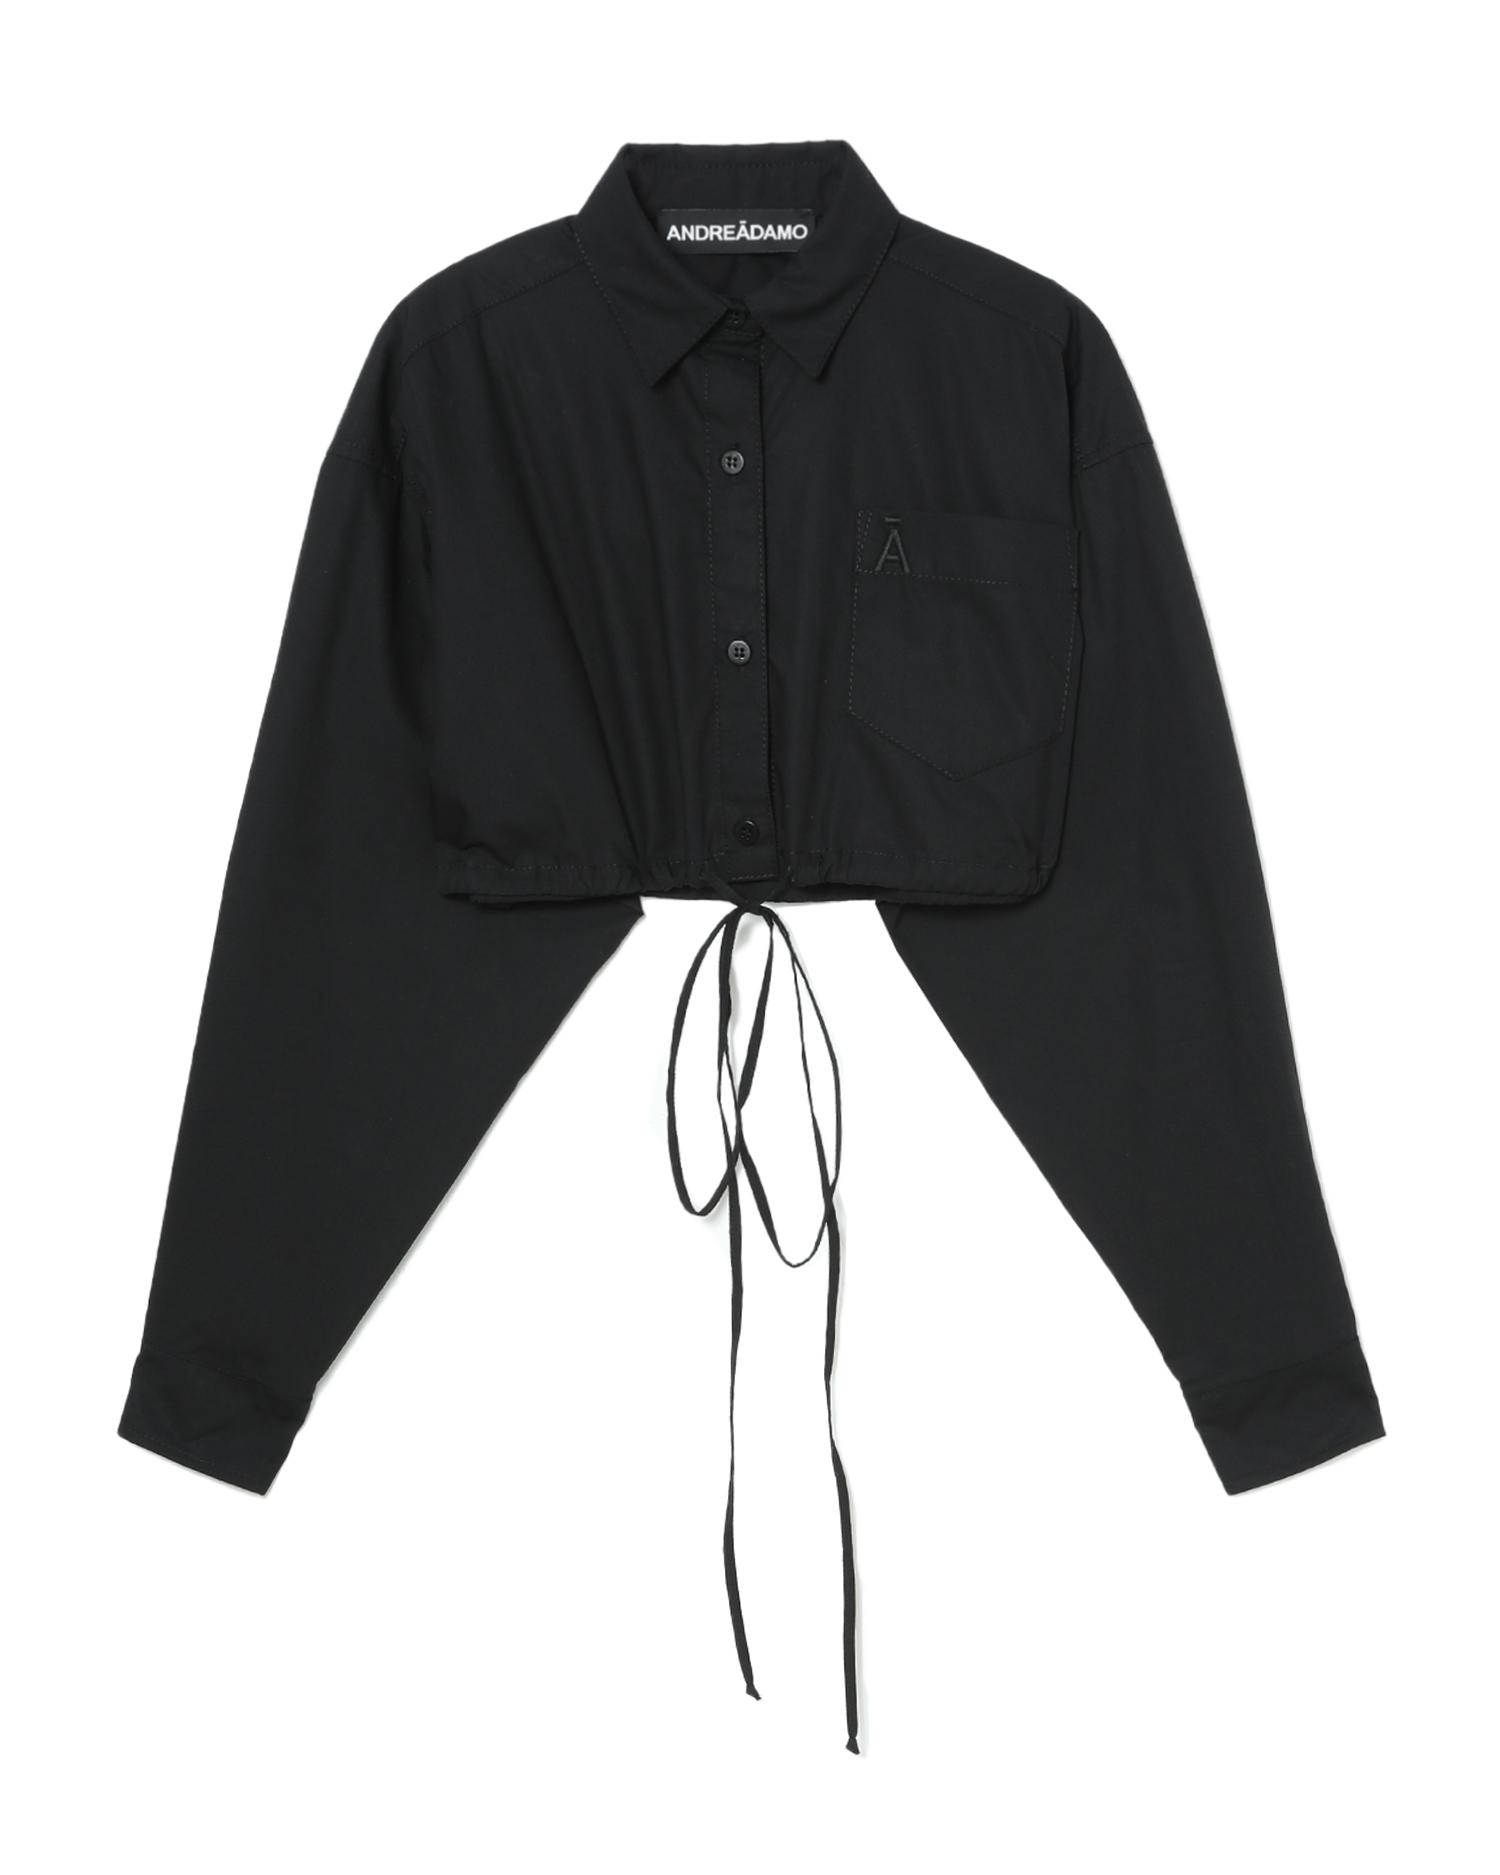 Cropped shirt by ANDREA ADAMO